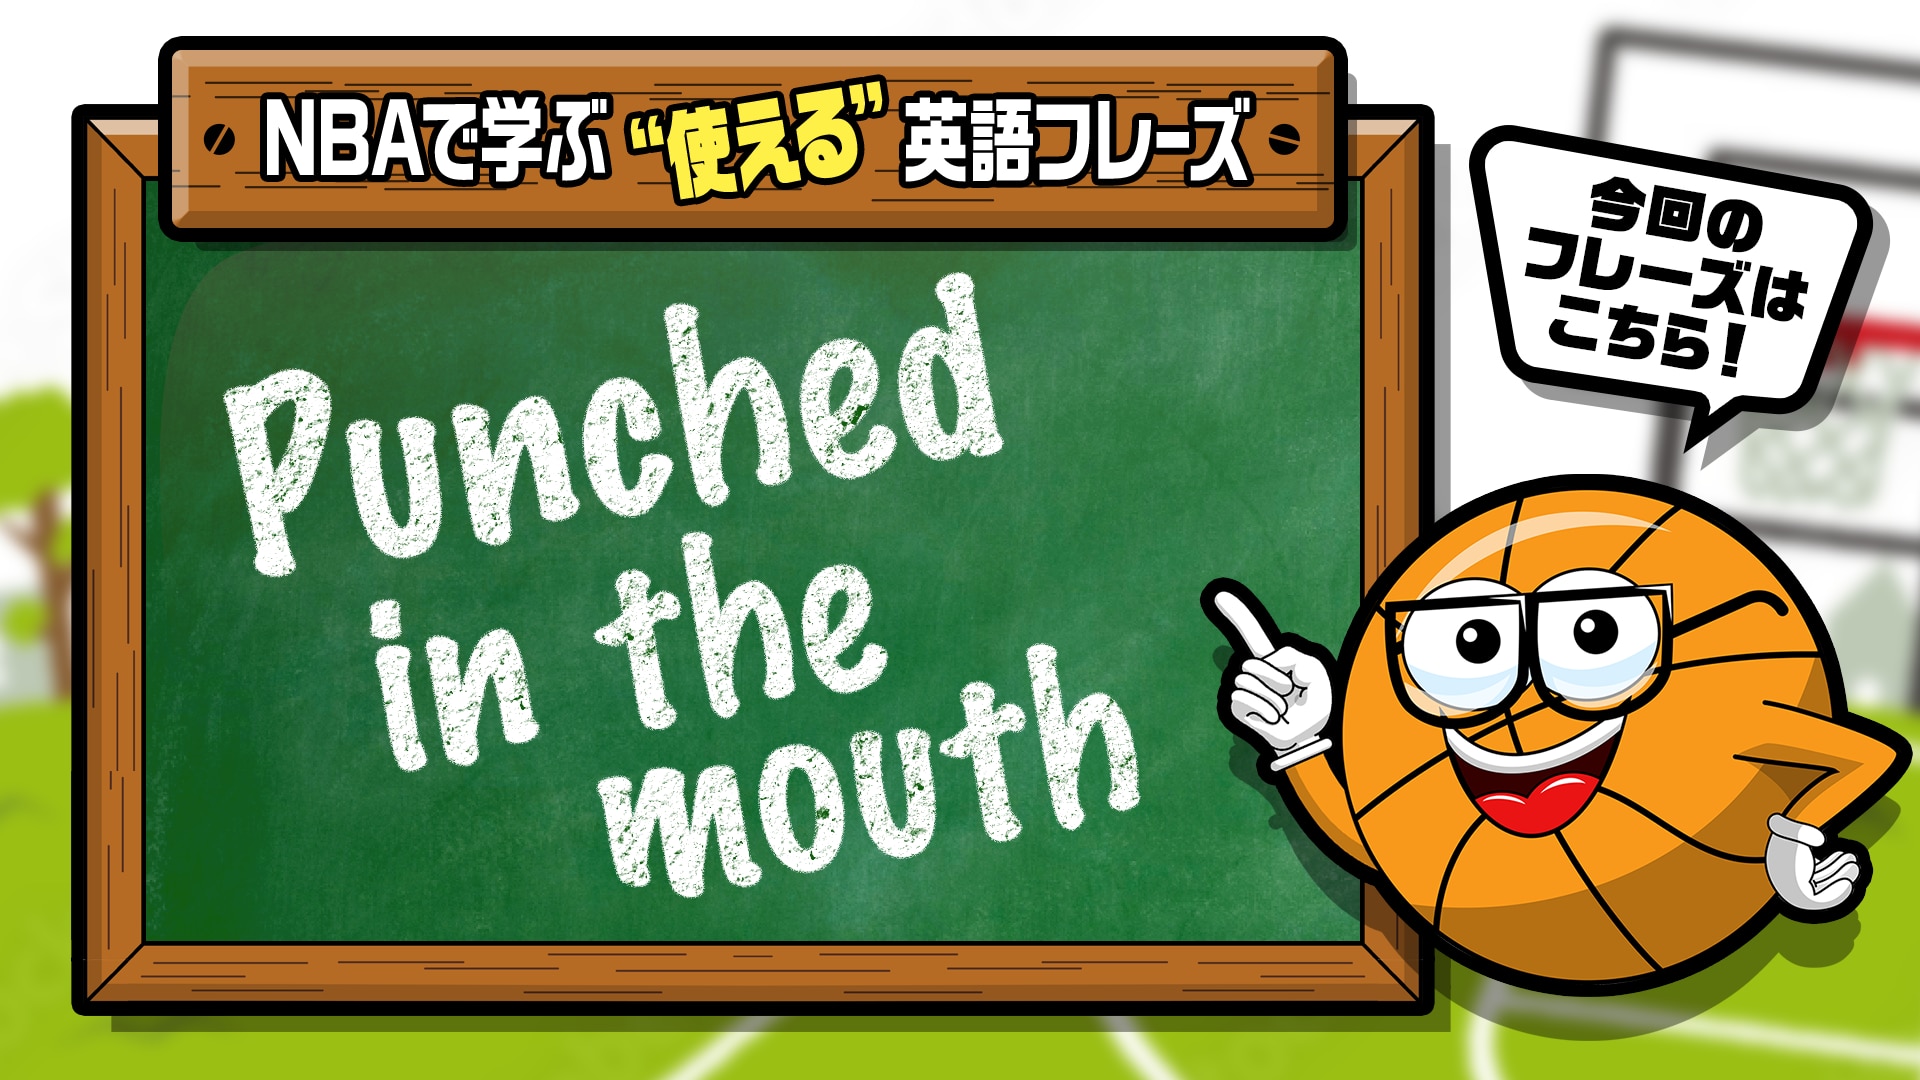 NBAでよく聞く英語フレーズ｜Vol.4：Punched in the Mouth